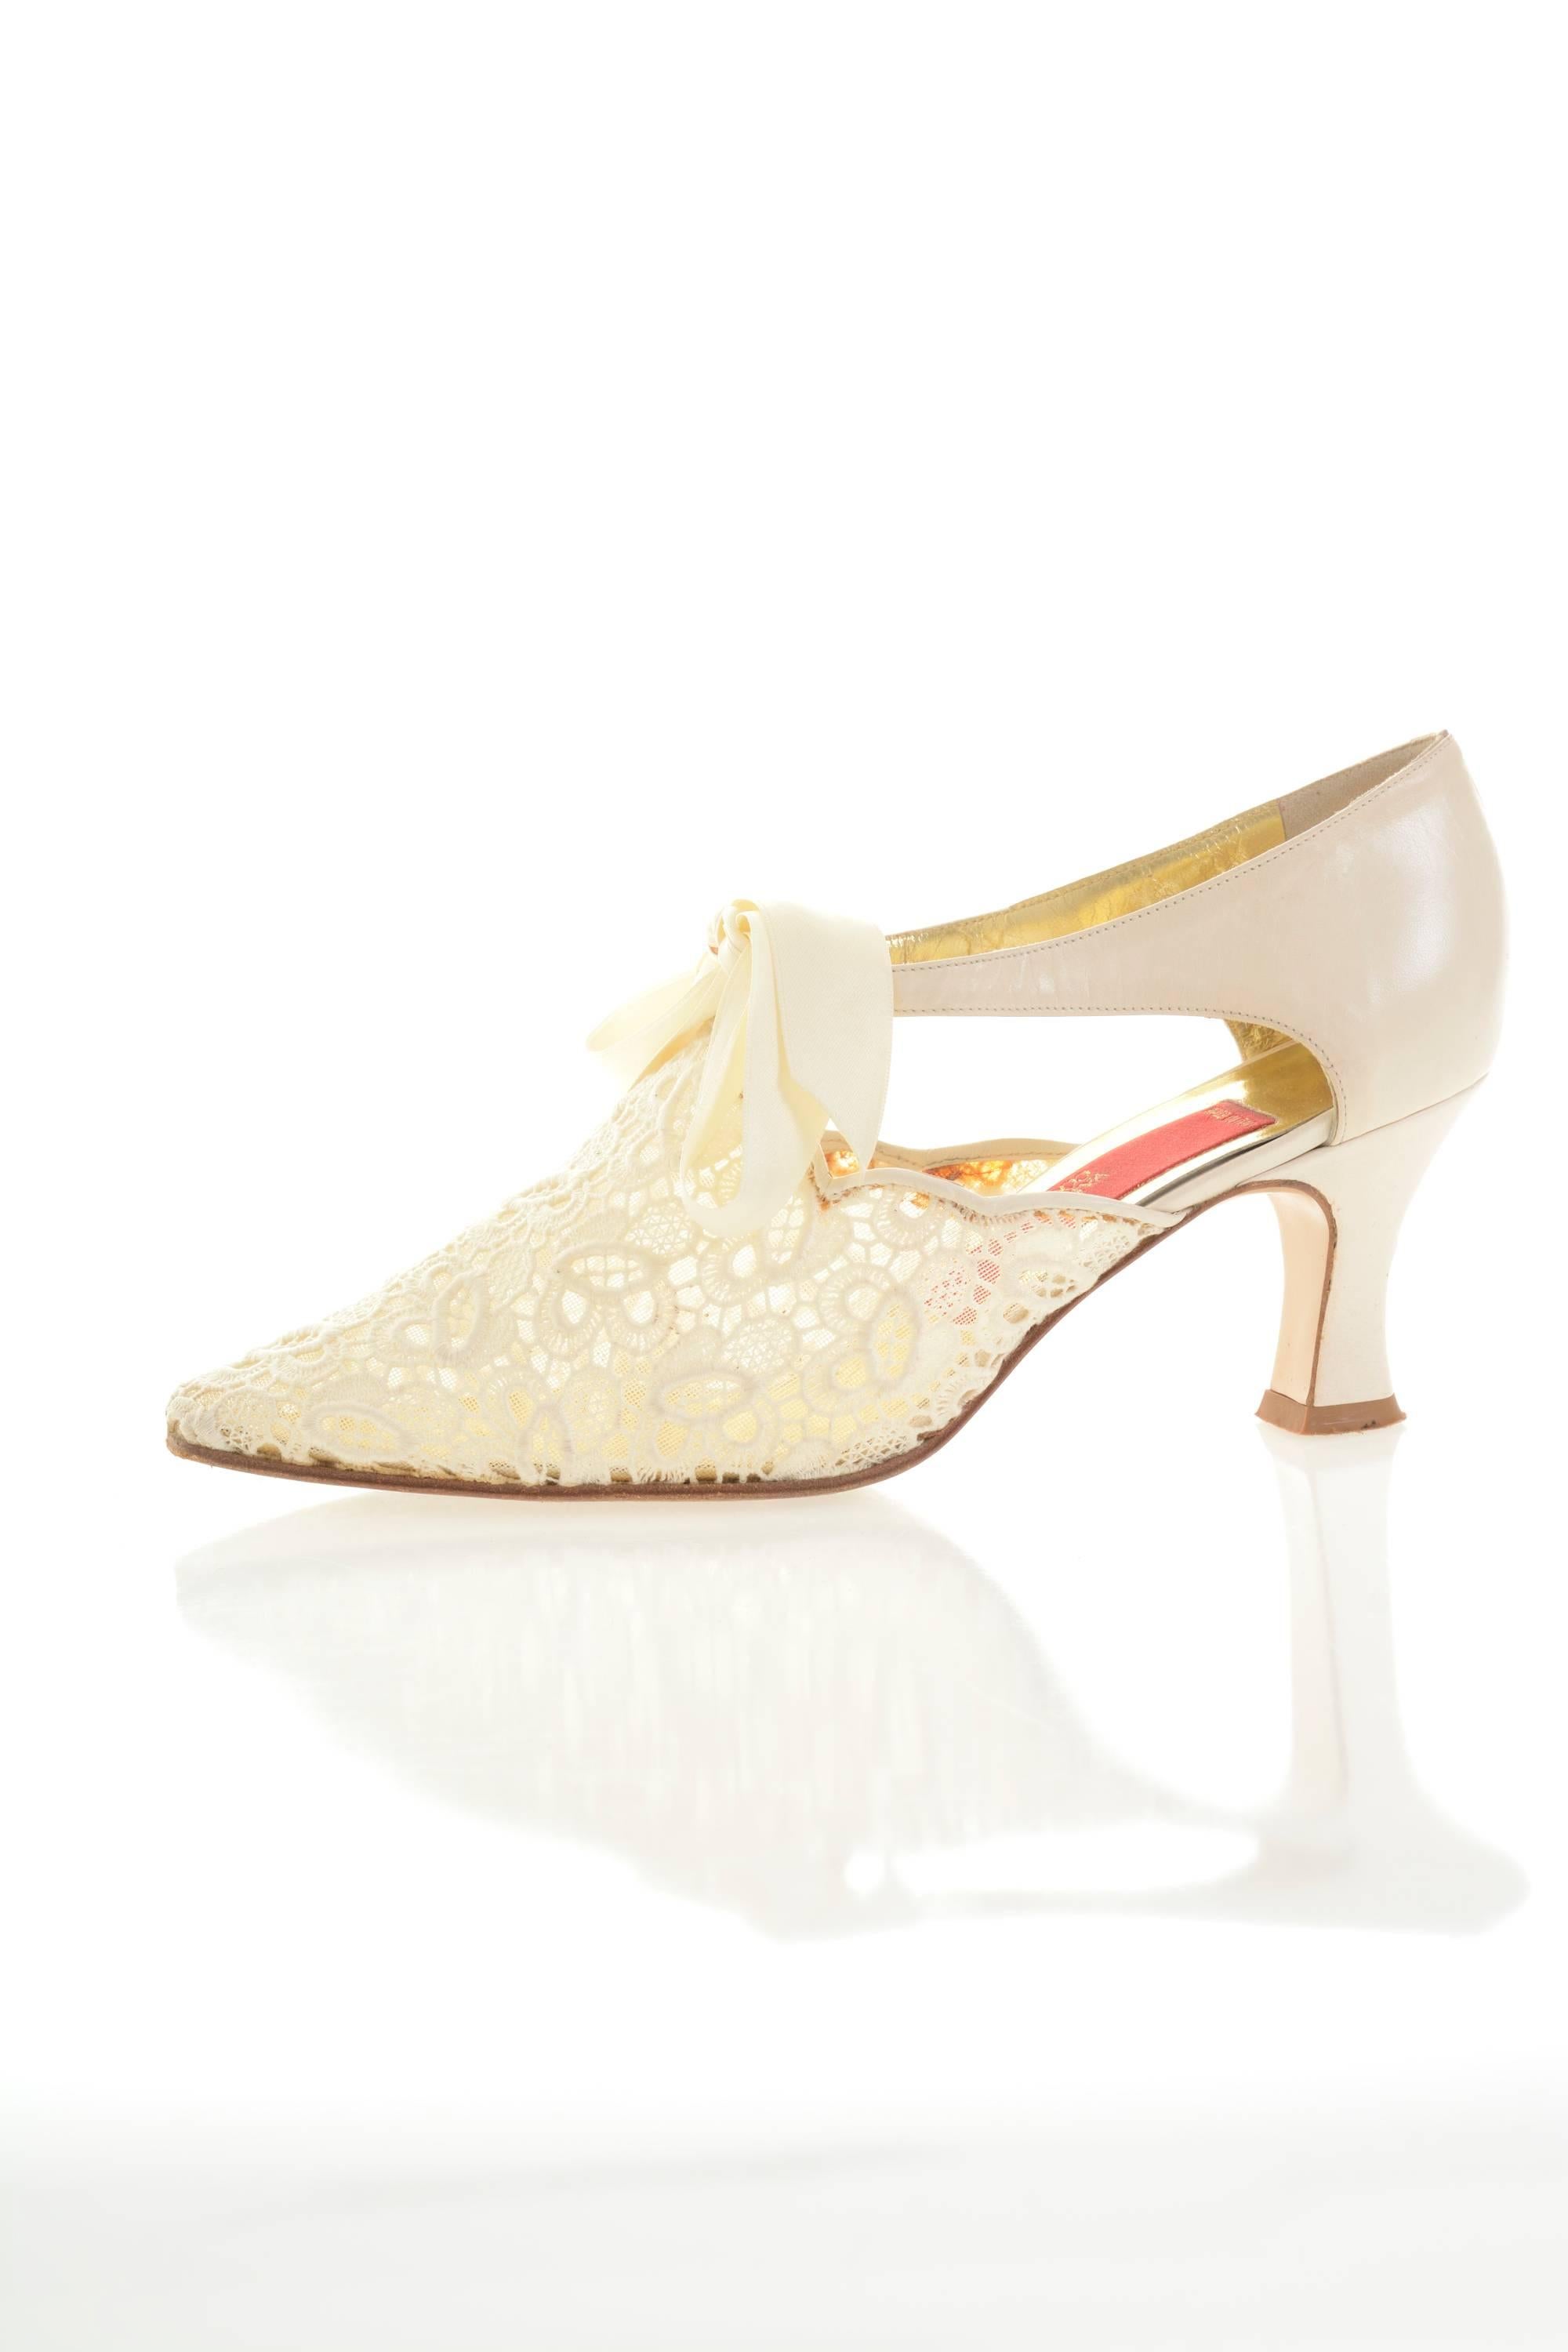 1980s VALENTINO COUTURE White Pearl Lace Italian Shoes 1